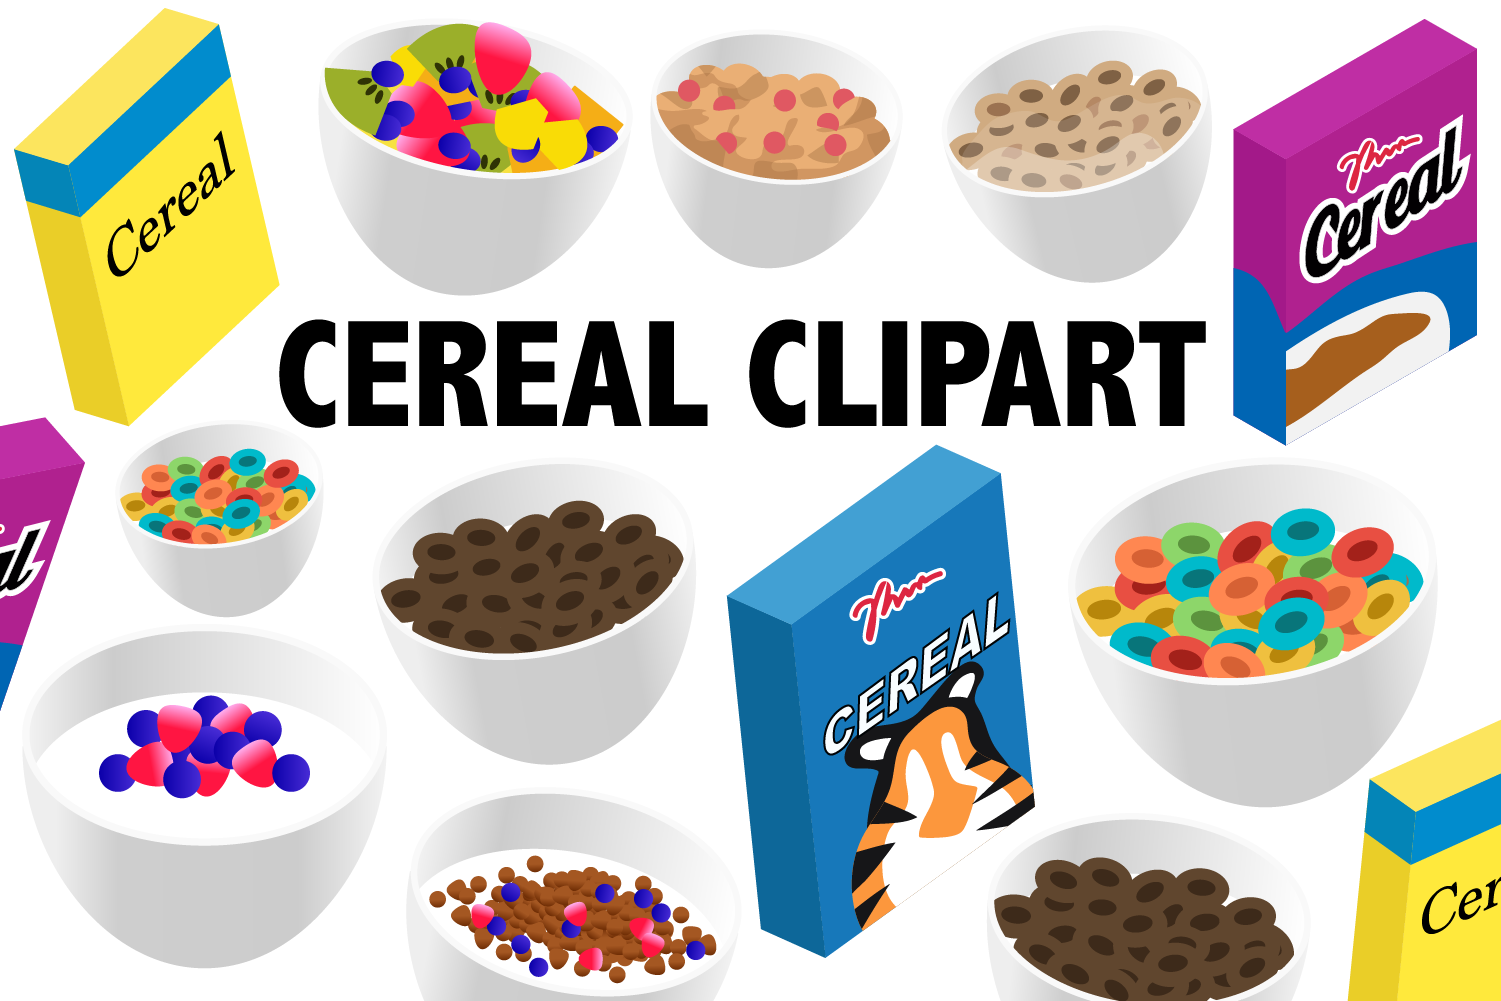 . Cereal clipart ceral